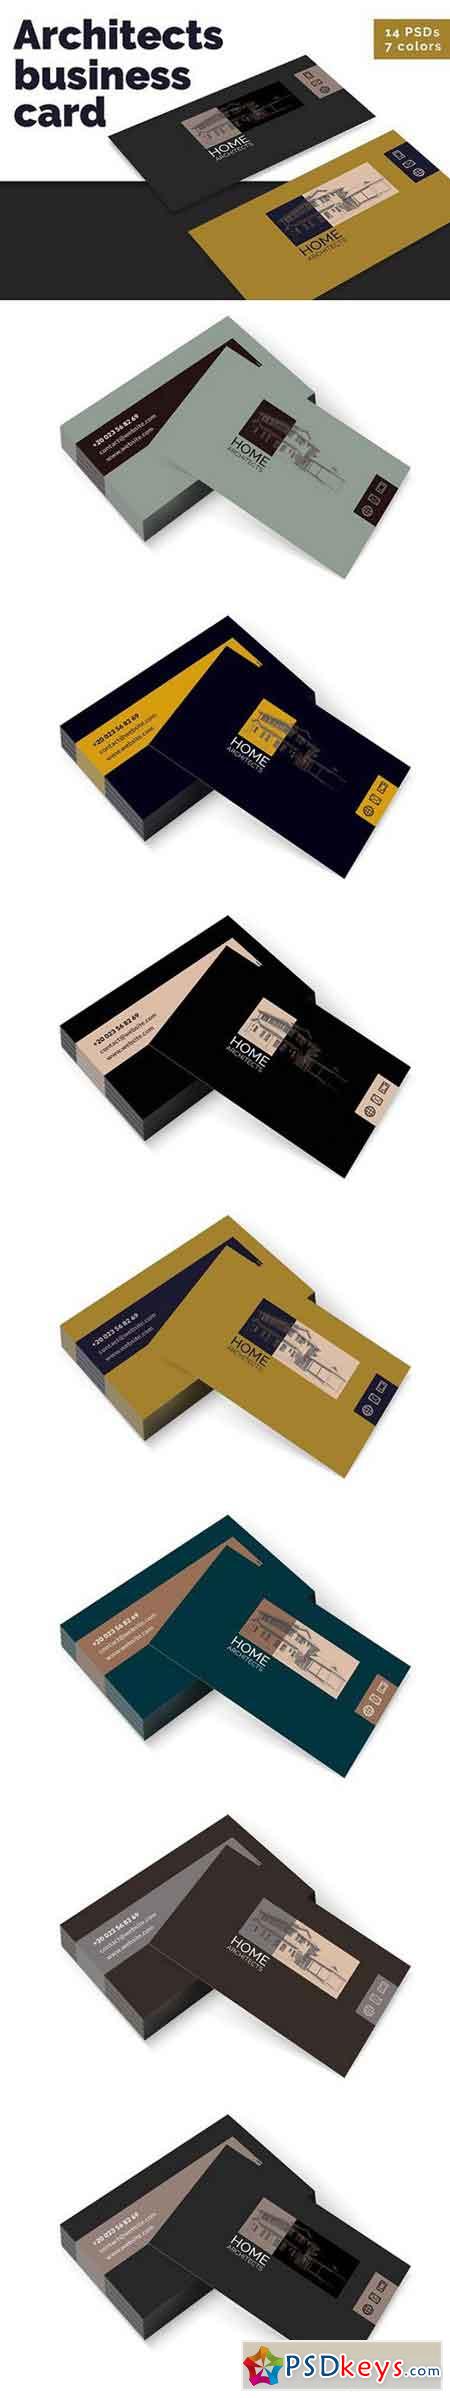 Architects Business Cards Templates 1312888